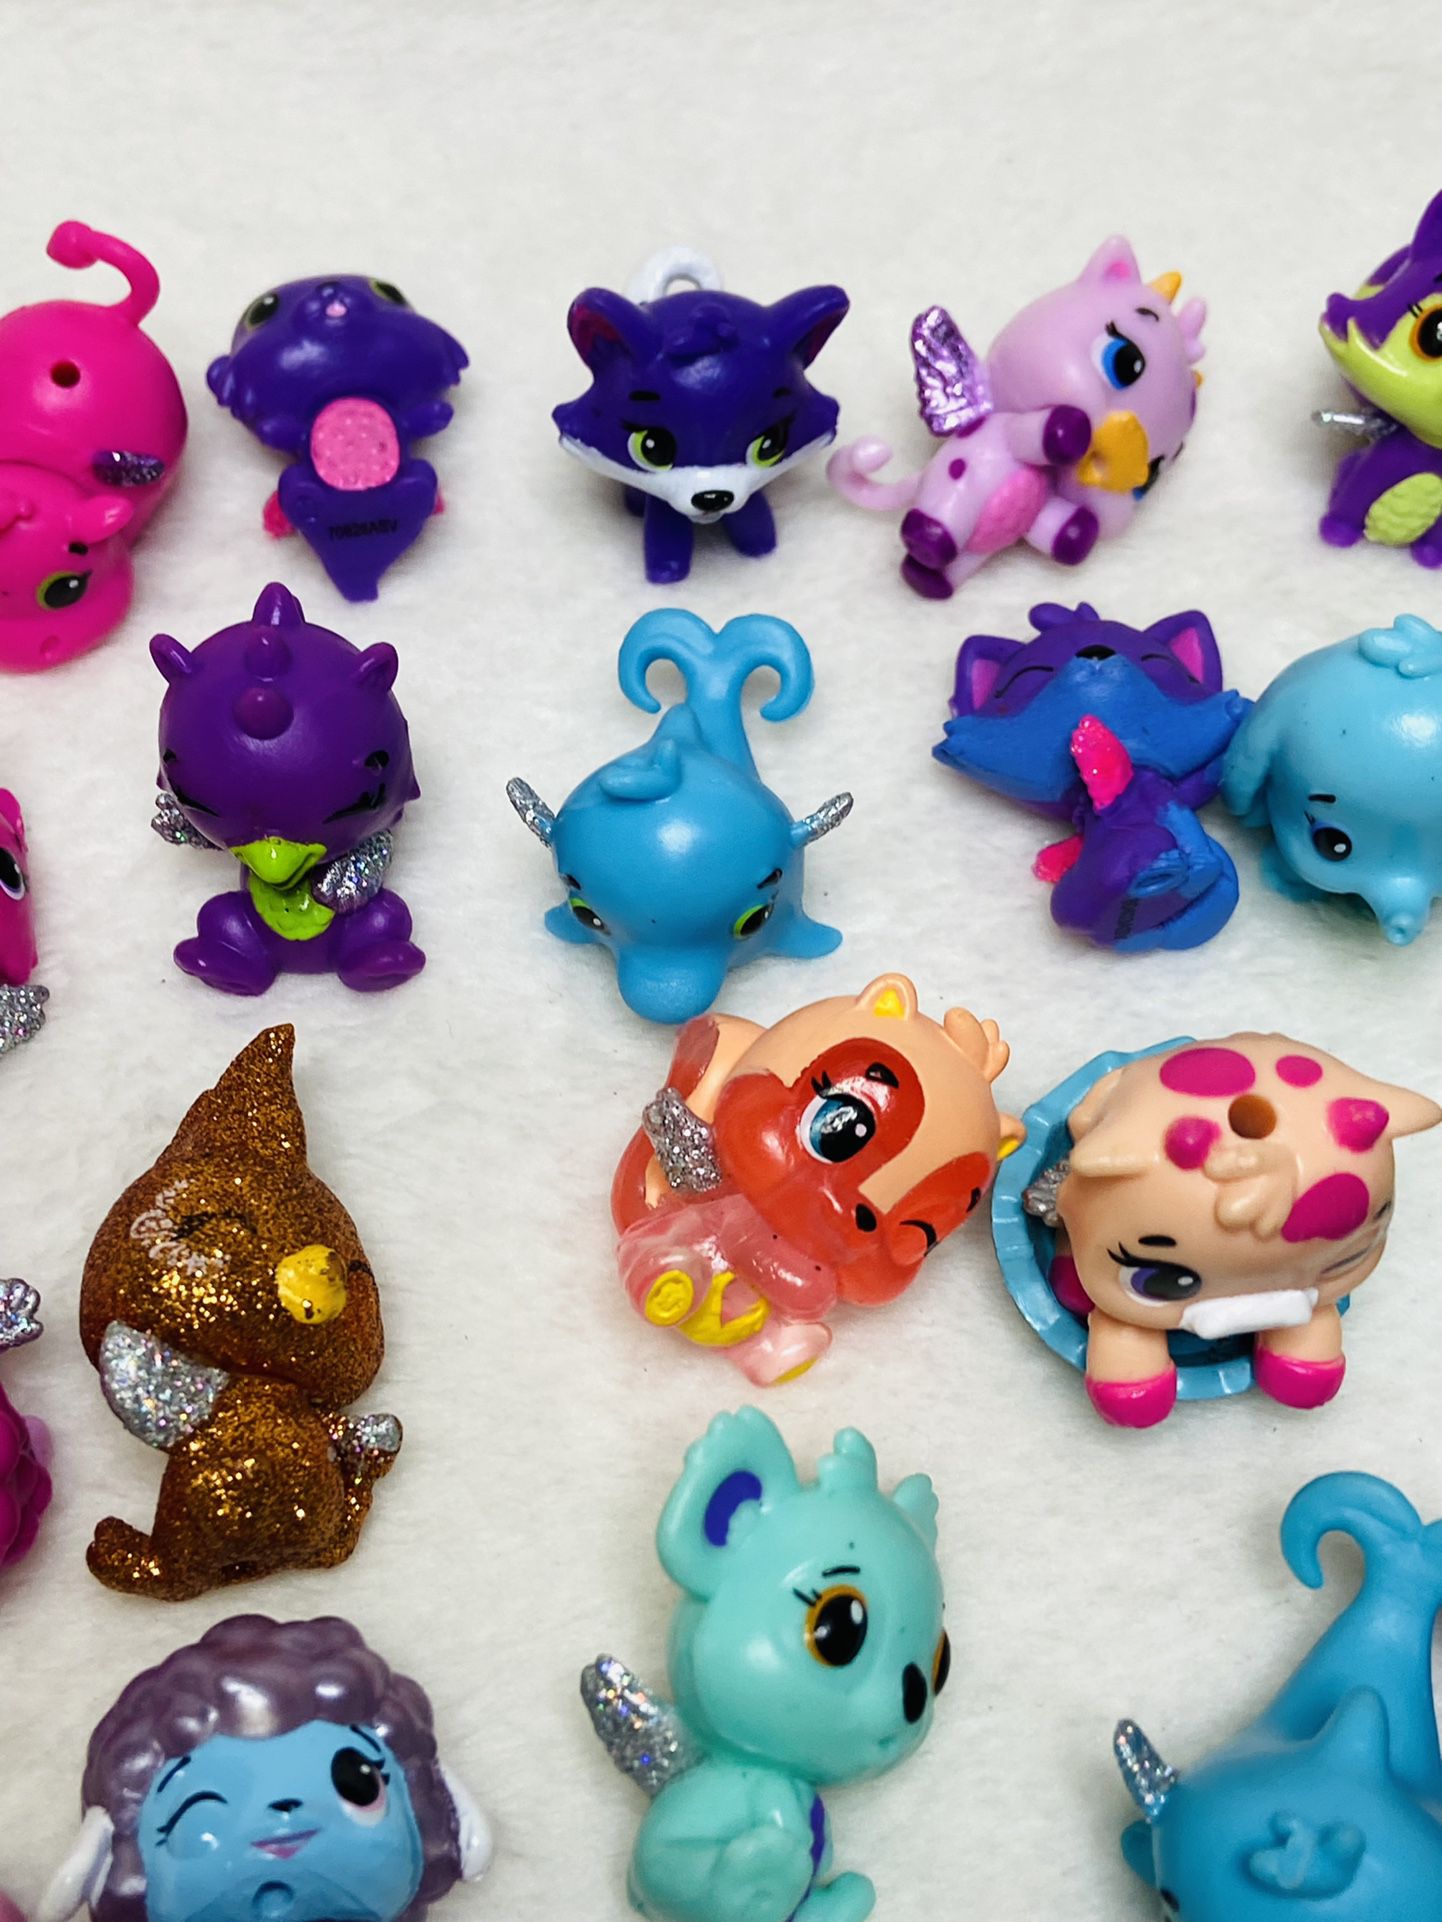 50 Hatchimals Lot Colorful Blind Bag Zoo Toys